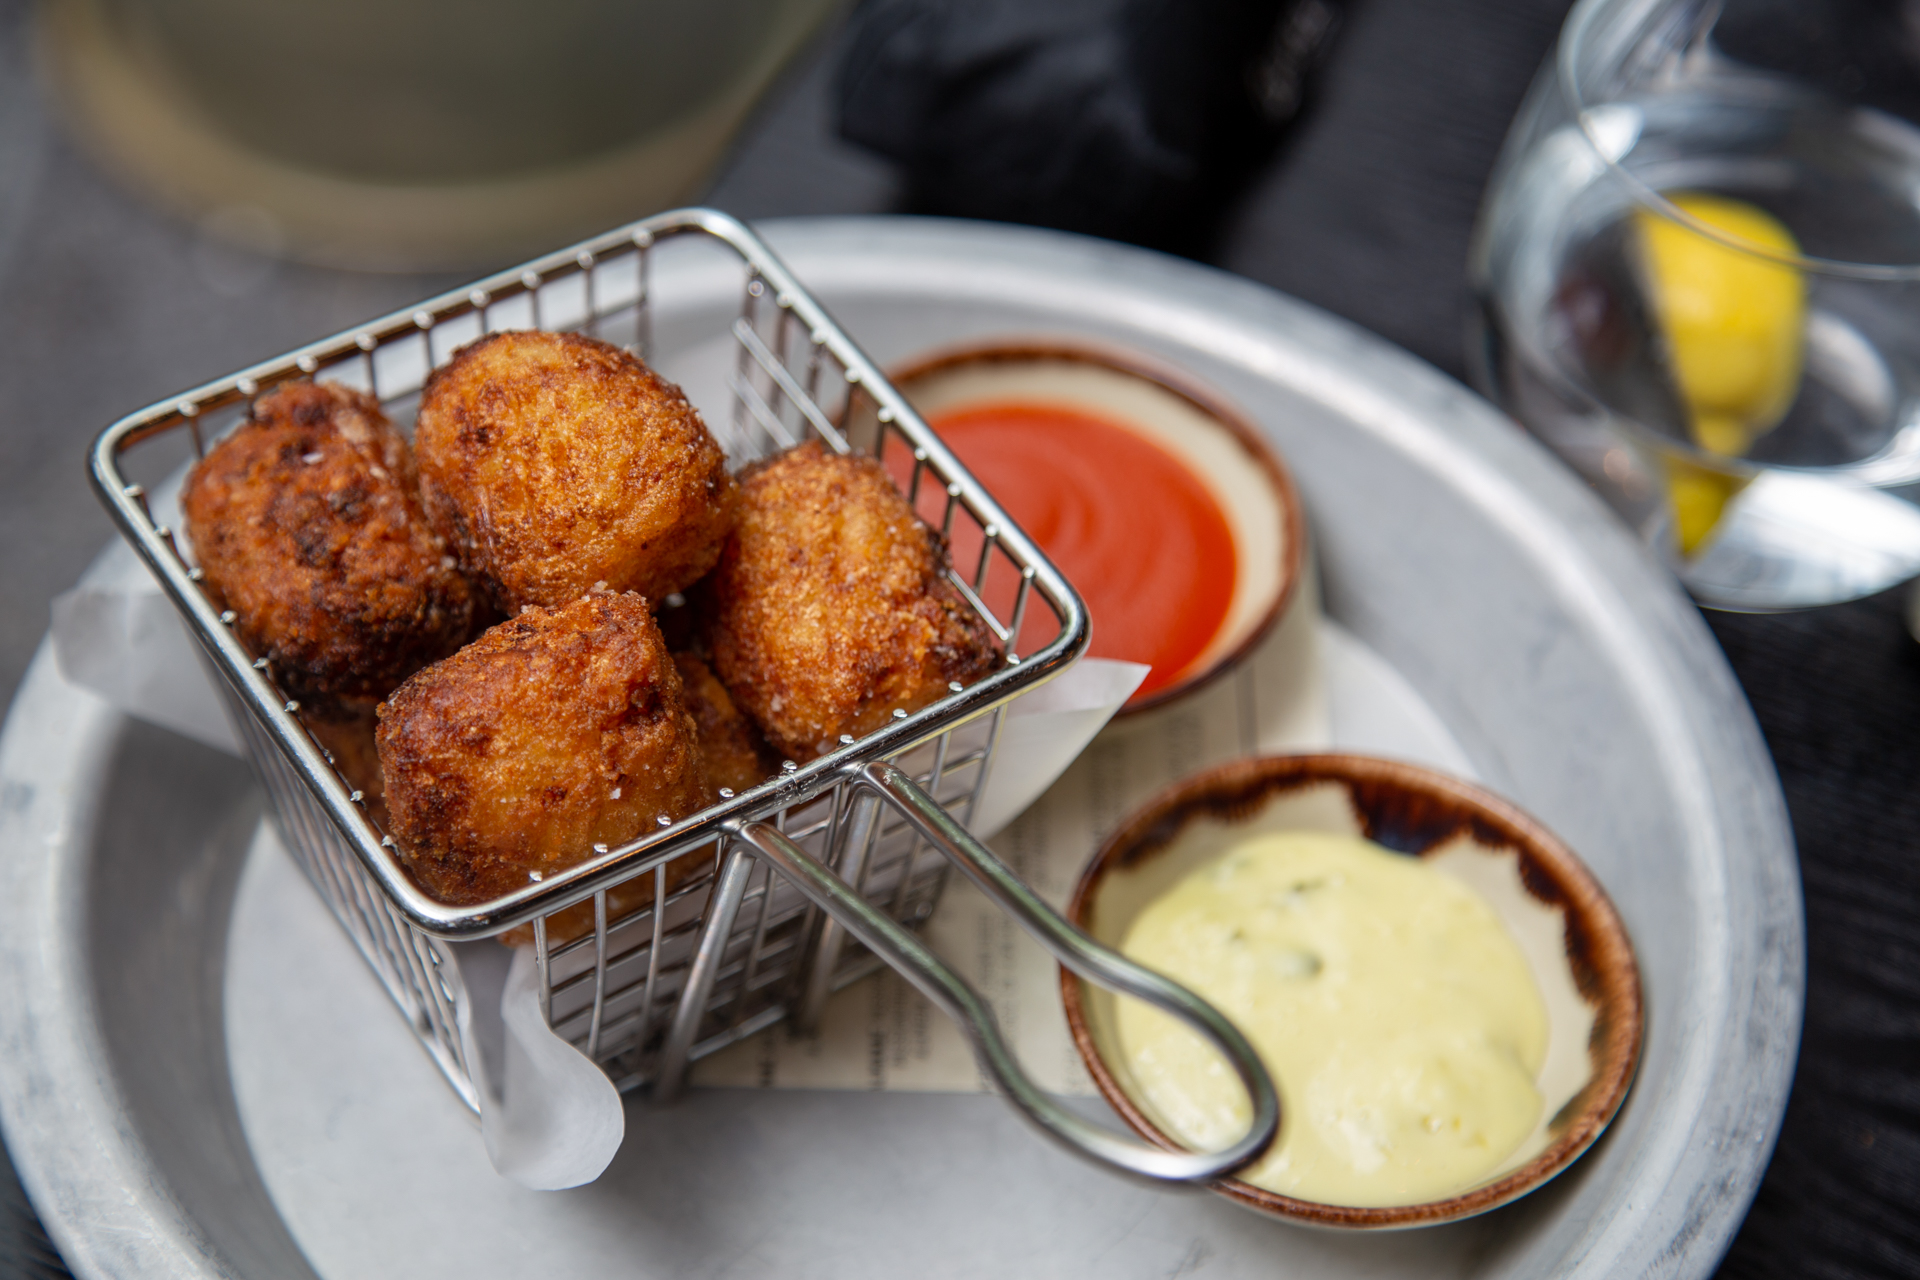 ALX's housemade tater tots are stuffed with chevre goat cheese.